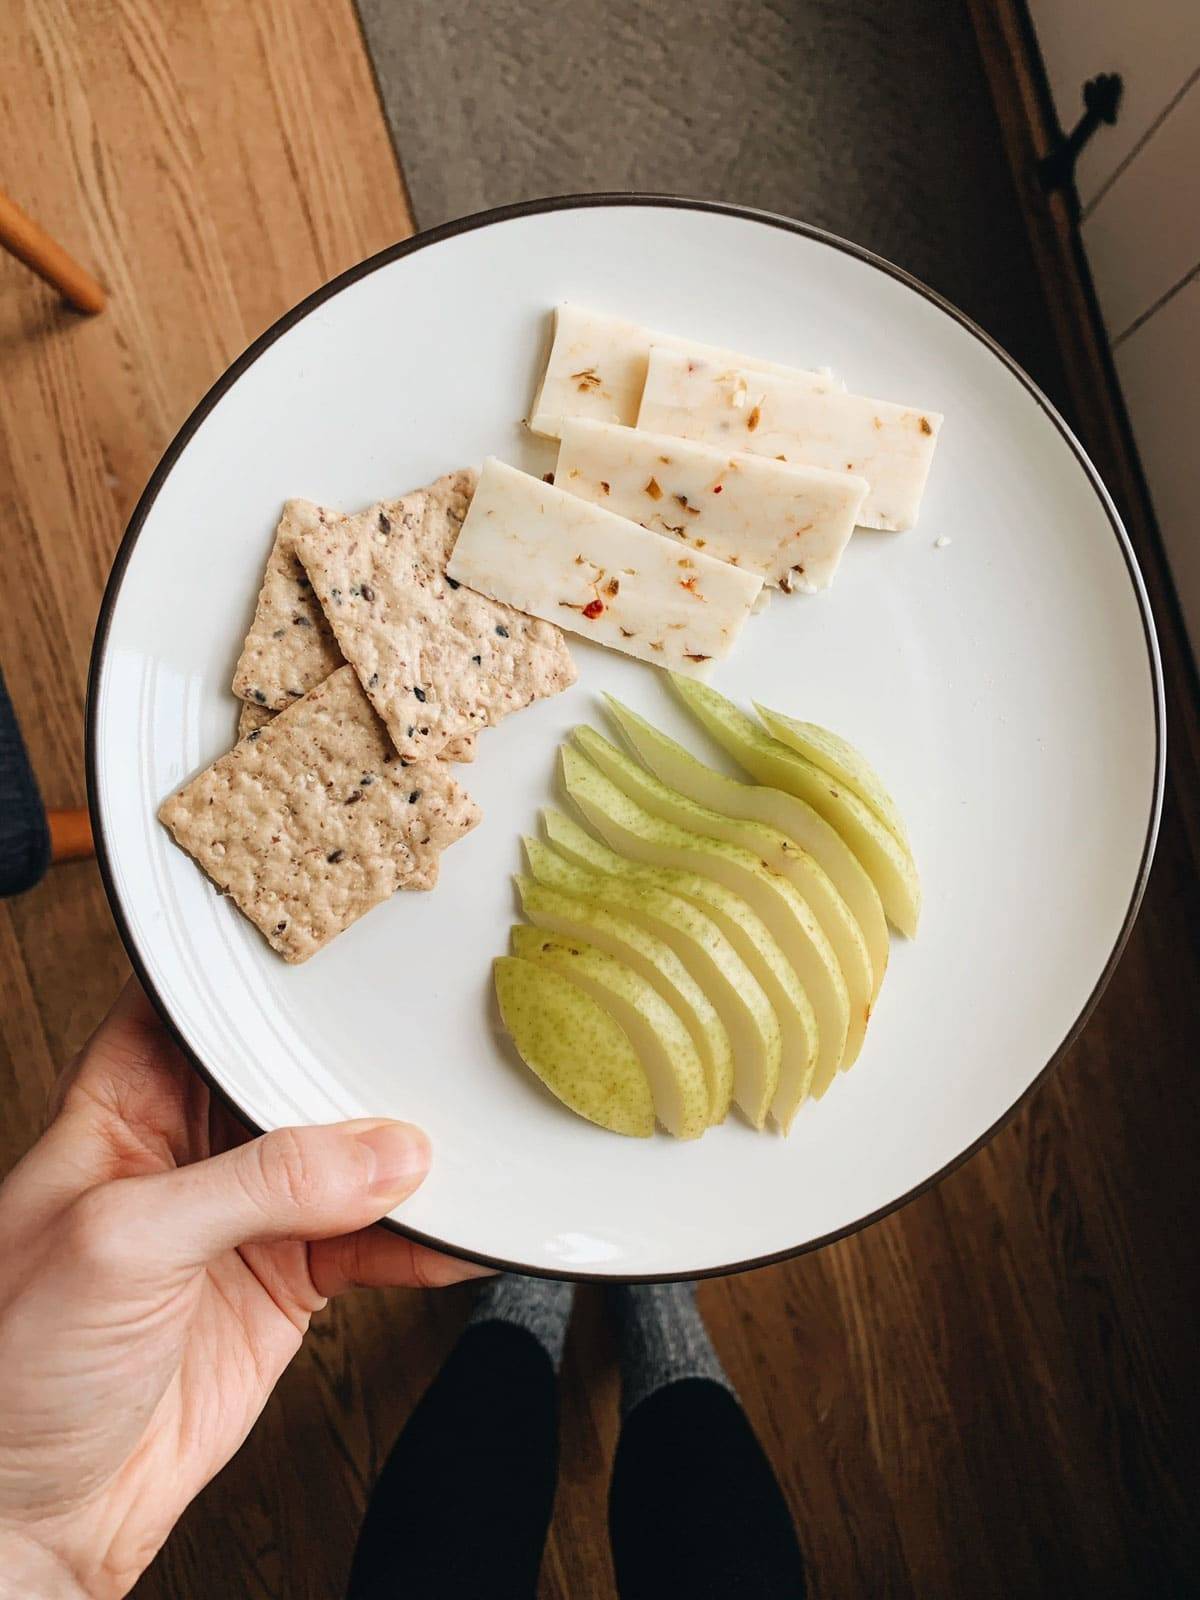 Crackers, cheese and fruit on a plate.